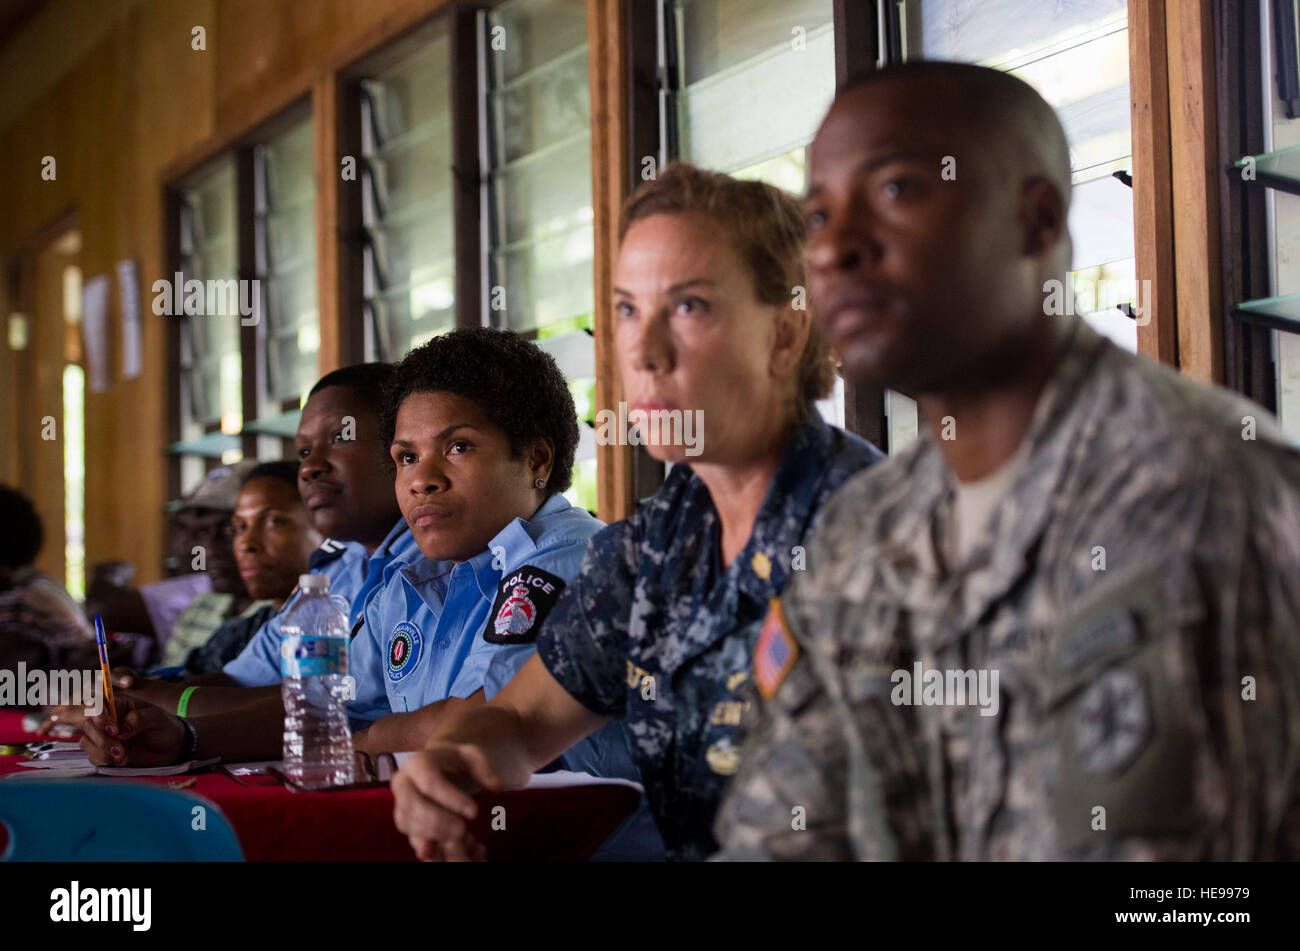 ARAWA, Autonomous Region of Bougainville, Papua New Guinea (July 2, 2015) Leaders from Bougainville, the Royal Papua New Guinea Constabulary, and Pacific Partnership 2015 conduct a family violence prevention workshop at the Tuniva Learning Center. Leaders from Bougainville and the hospital ship USNS Mercy (T-AH 19) conducted the workshop as part of the National Action Plan on Women, Peace and Security. Mercy is currently in Papua New Guinea for its second mission port of PP15. Pacific Partnership is in its 10th iteration and is the largest annual multilateral humanitarian assistance and disast Stock Photo